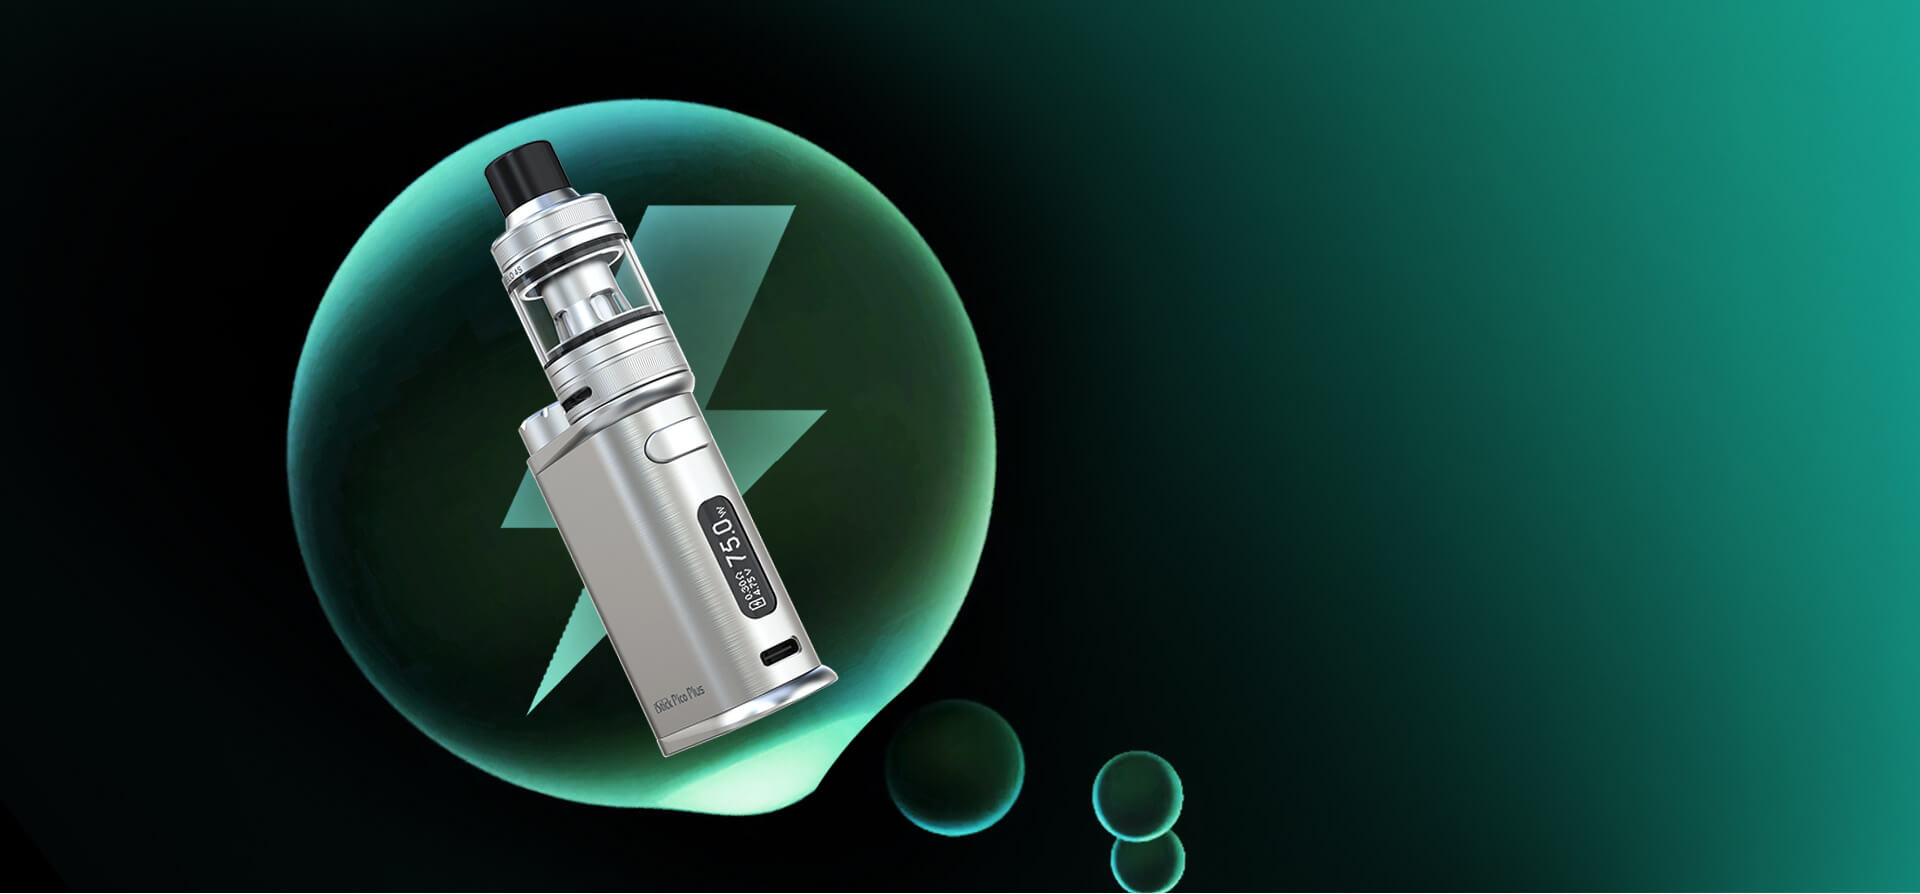 With USB-C fast charging, iStick Pico Plus can secure your perfect vaping for long time